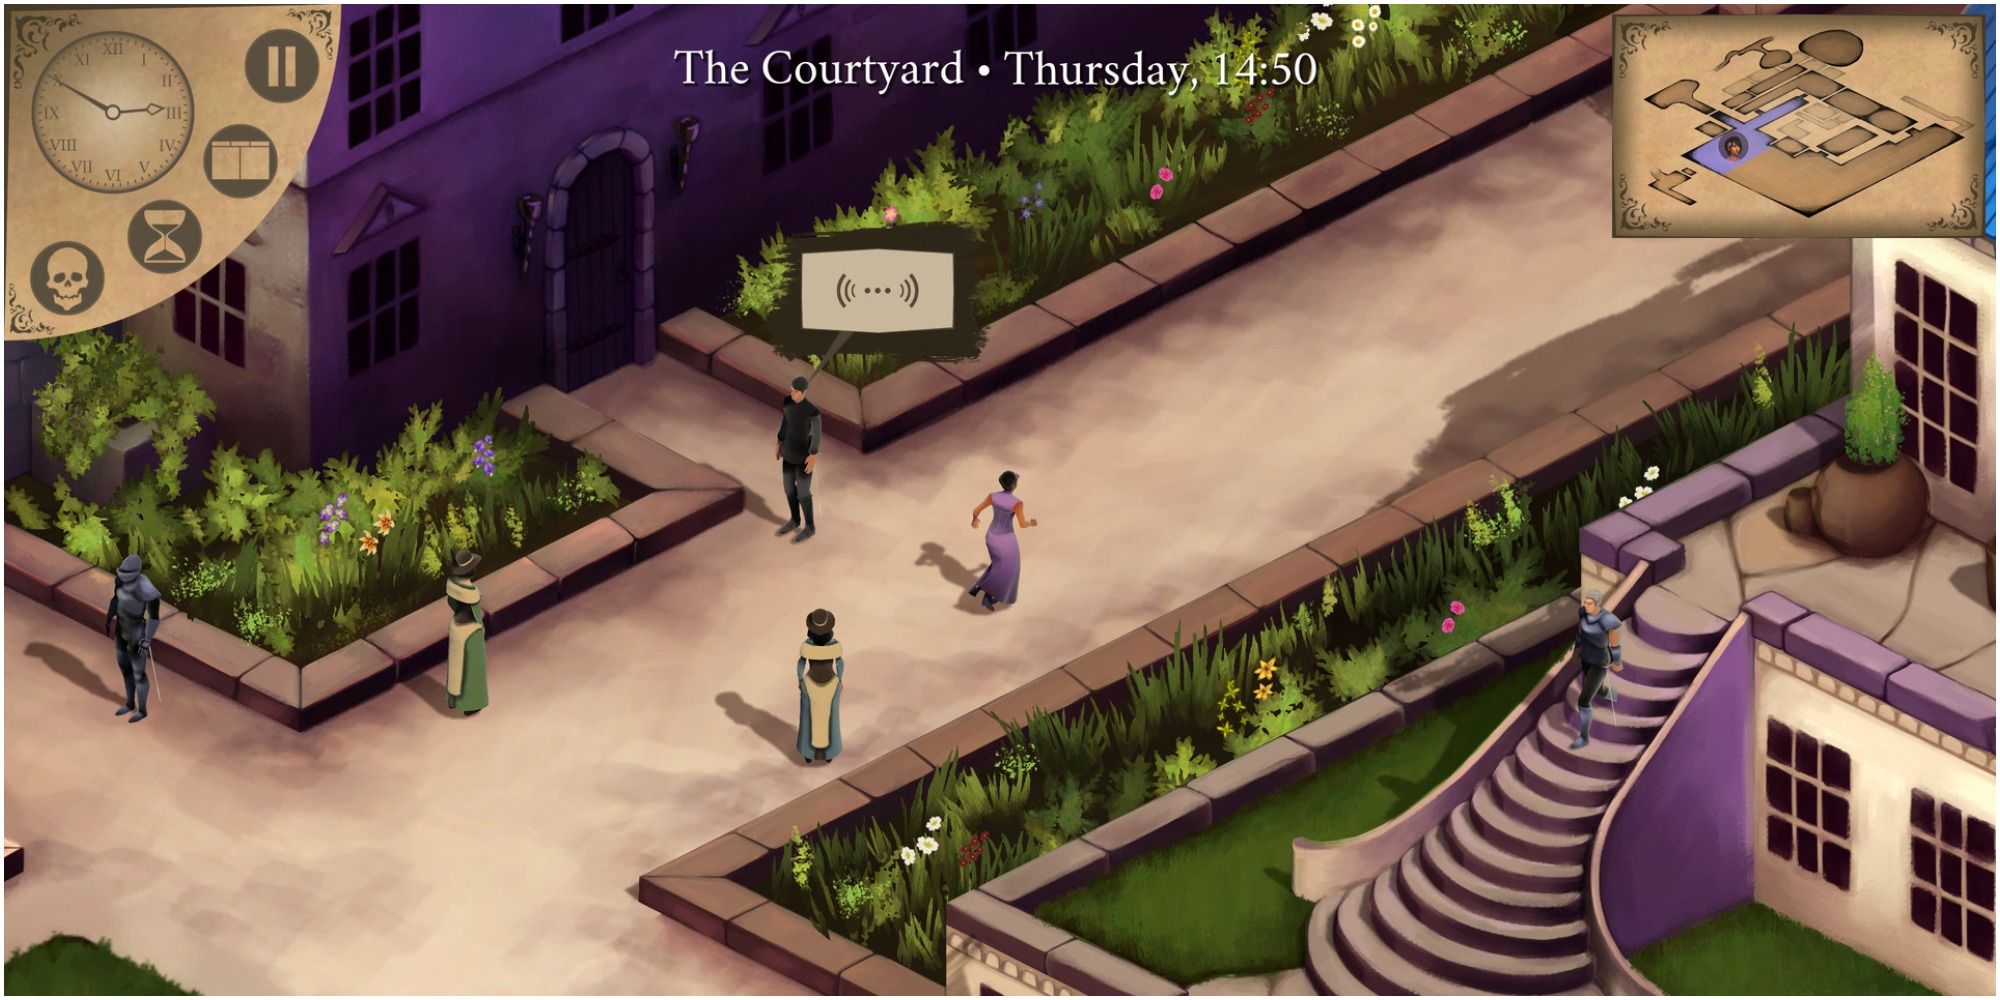 ophelia running through the courtyards